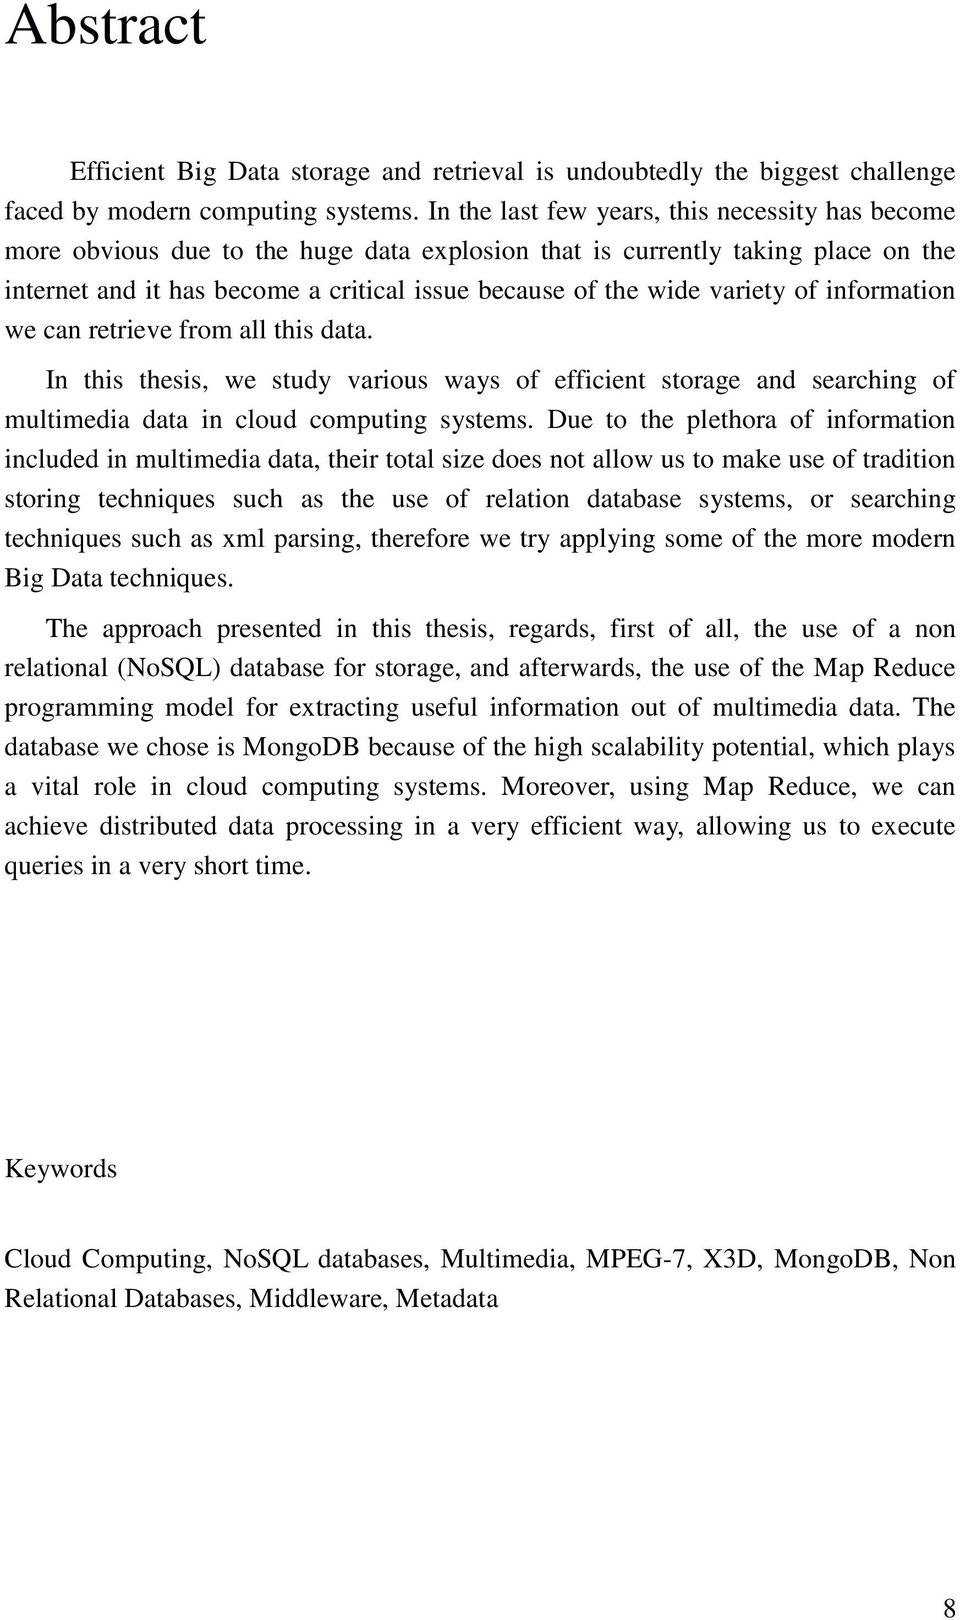 variety of information we can retrieve from all this data. In this thesis, we study various ways of efficient storage and searching of multimedia data in cloud computing systems.